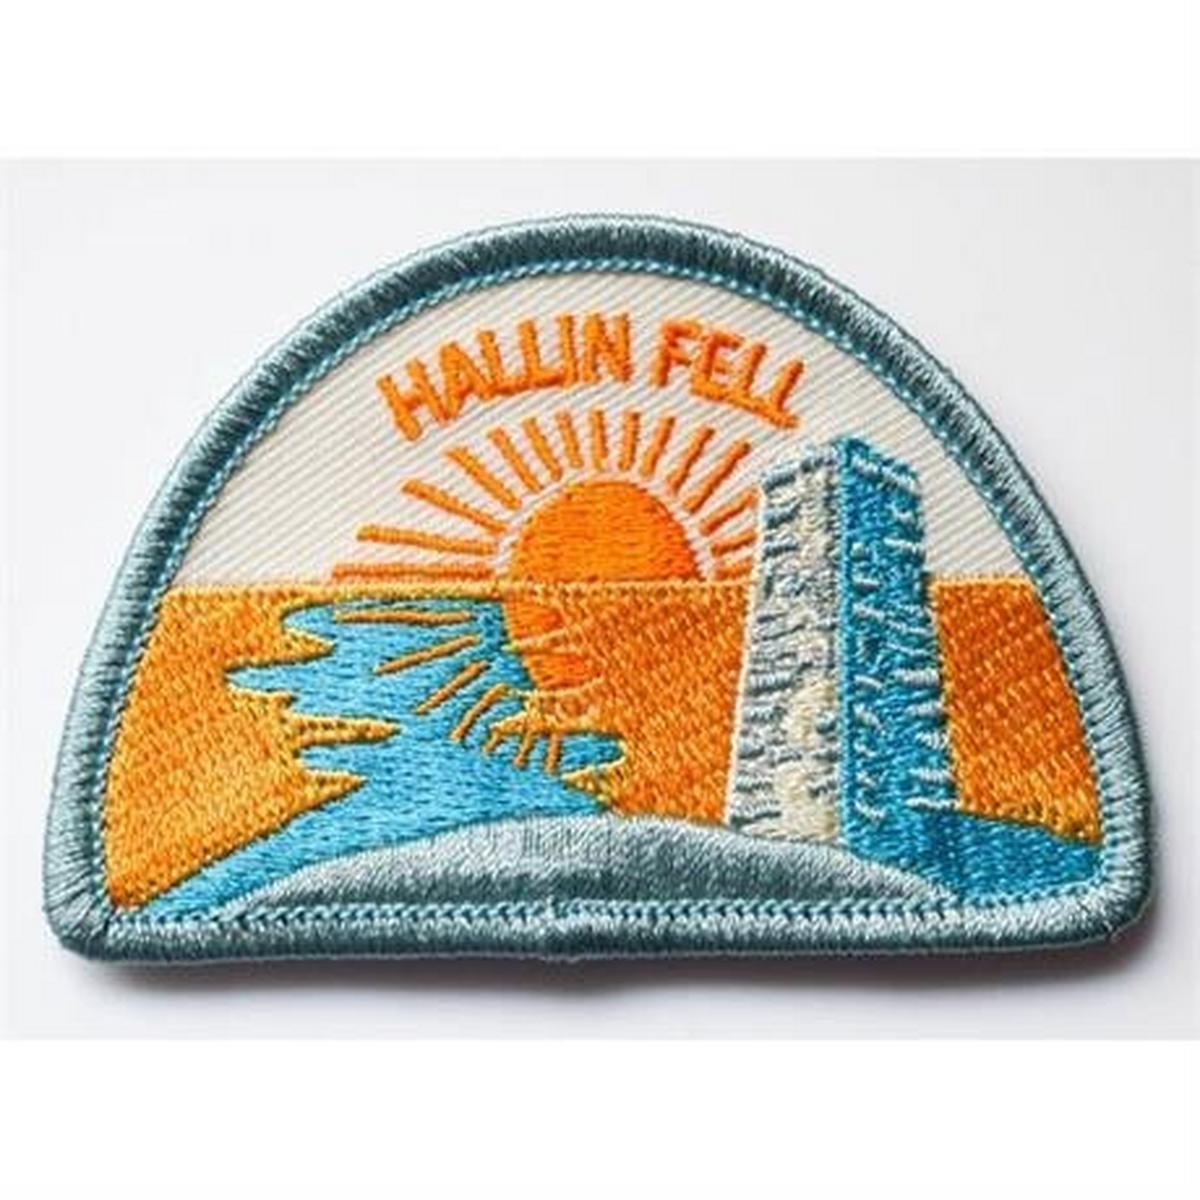 Conquer Lake District Patch - Hallin Fell